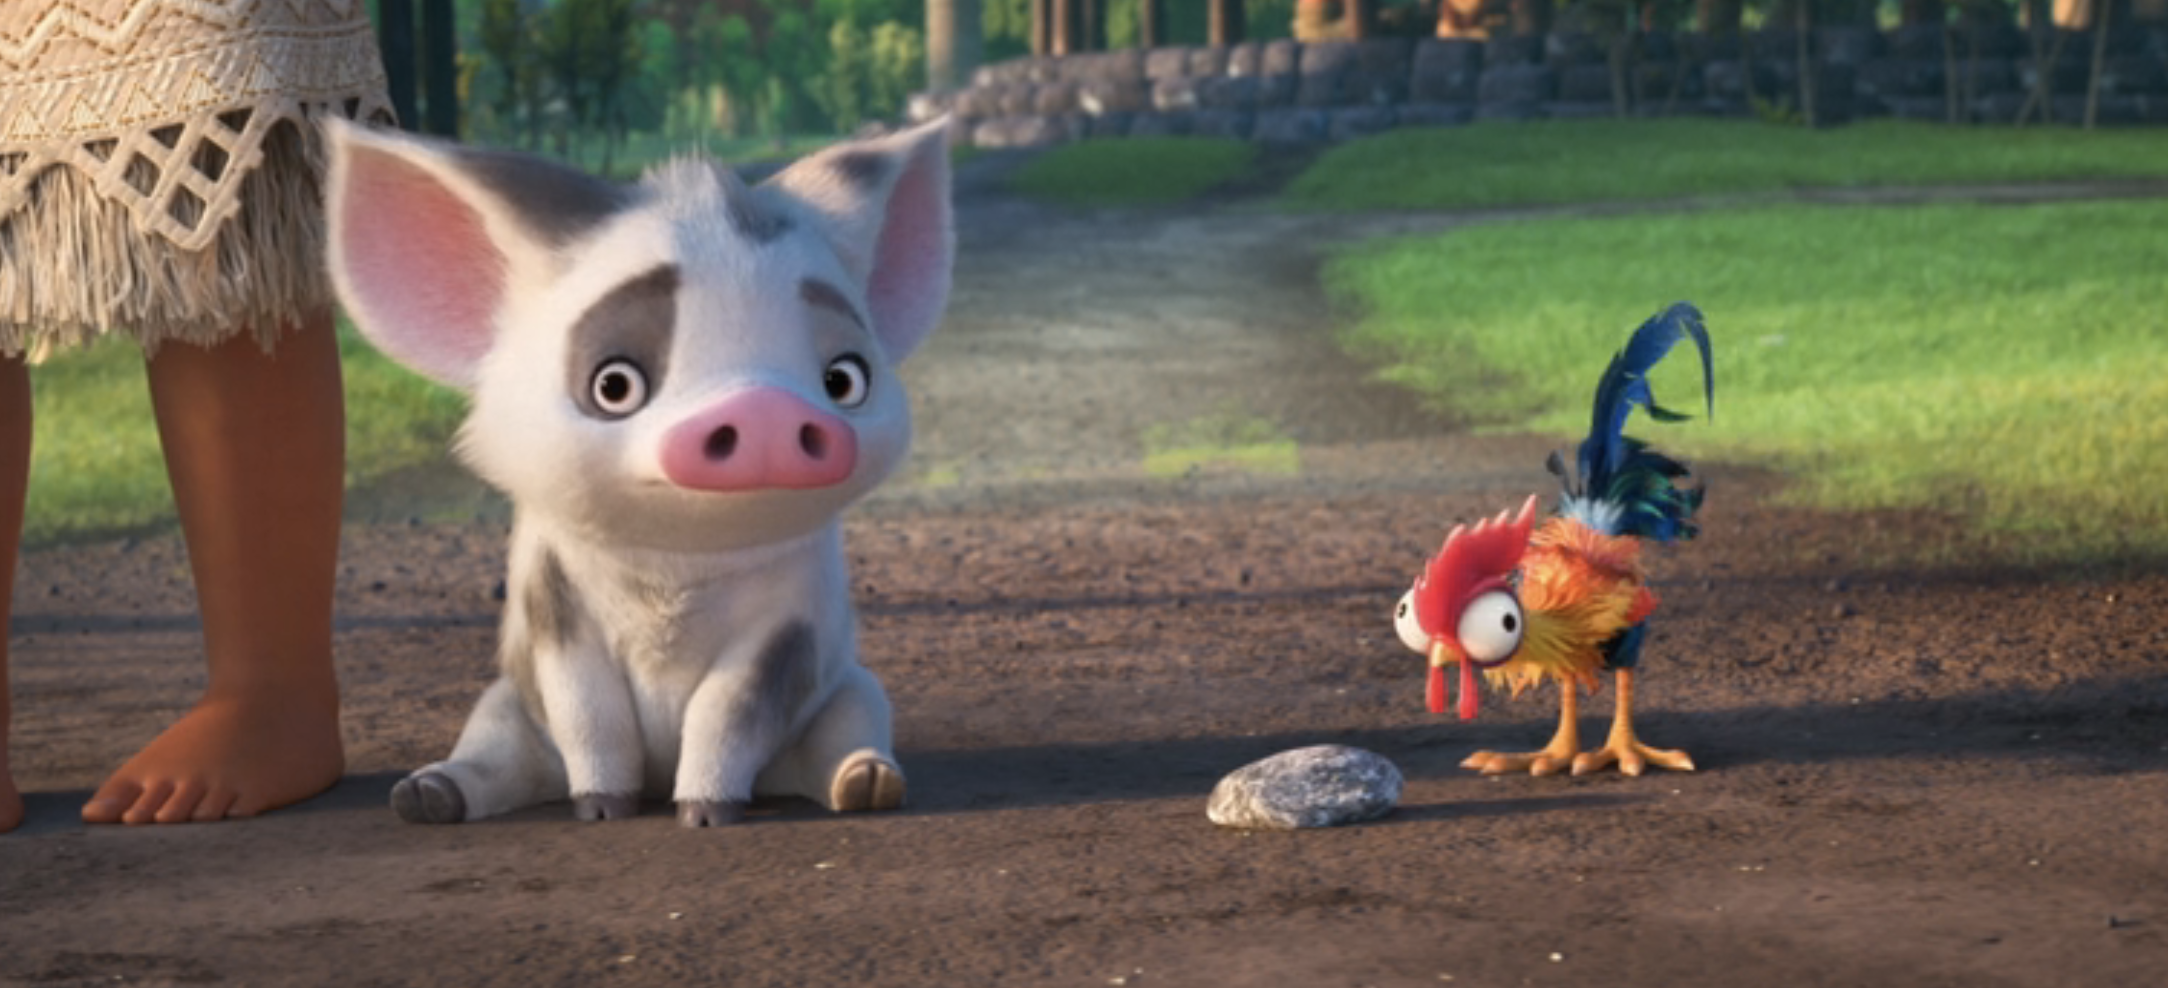 Pua the pig and Heihei the rooster from &quot;Moana&quot; looking curiously at a stone